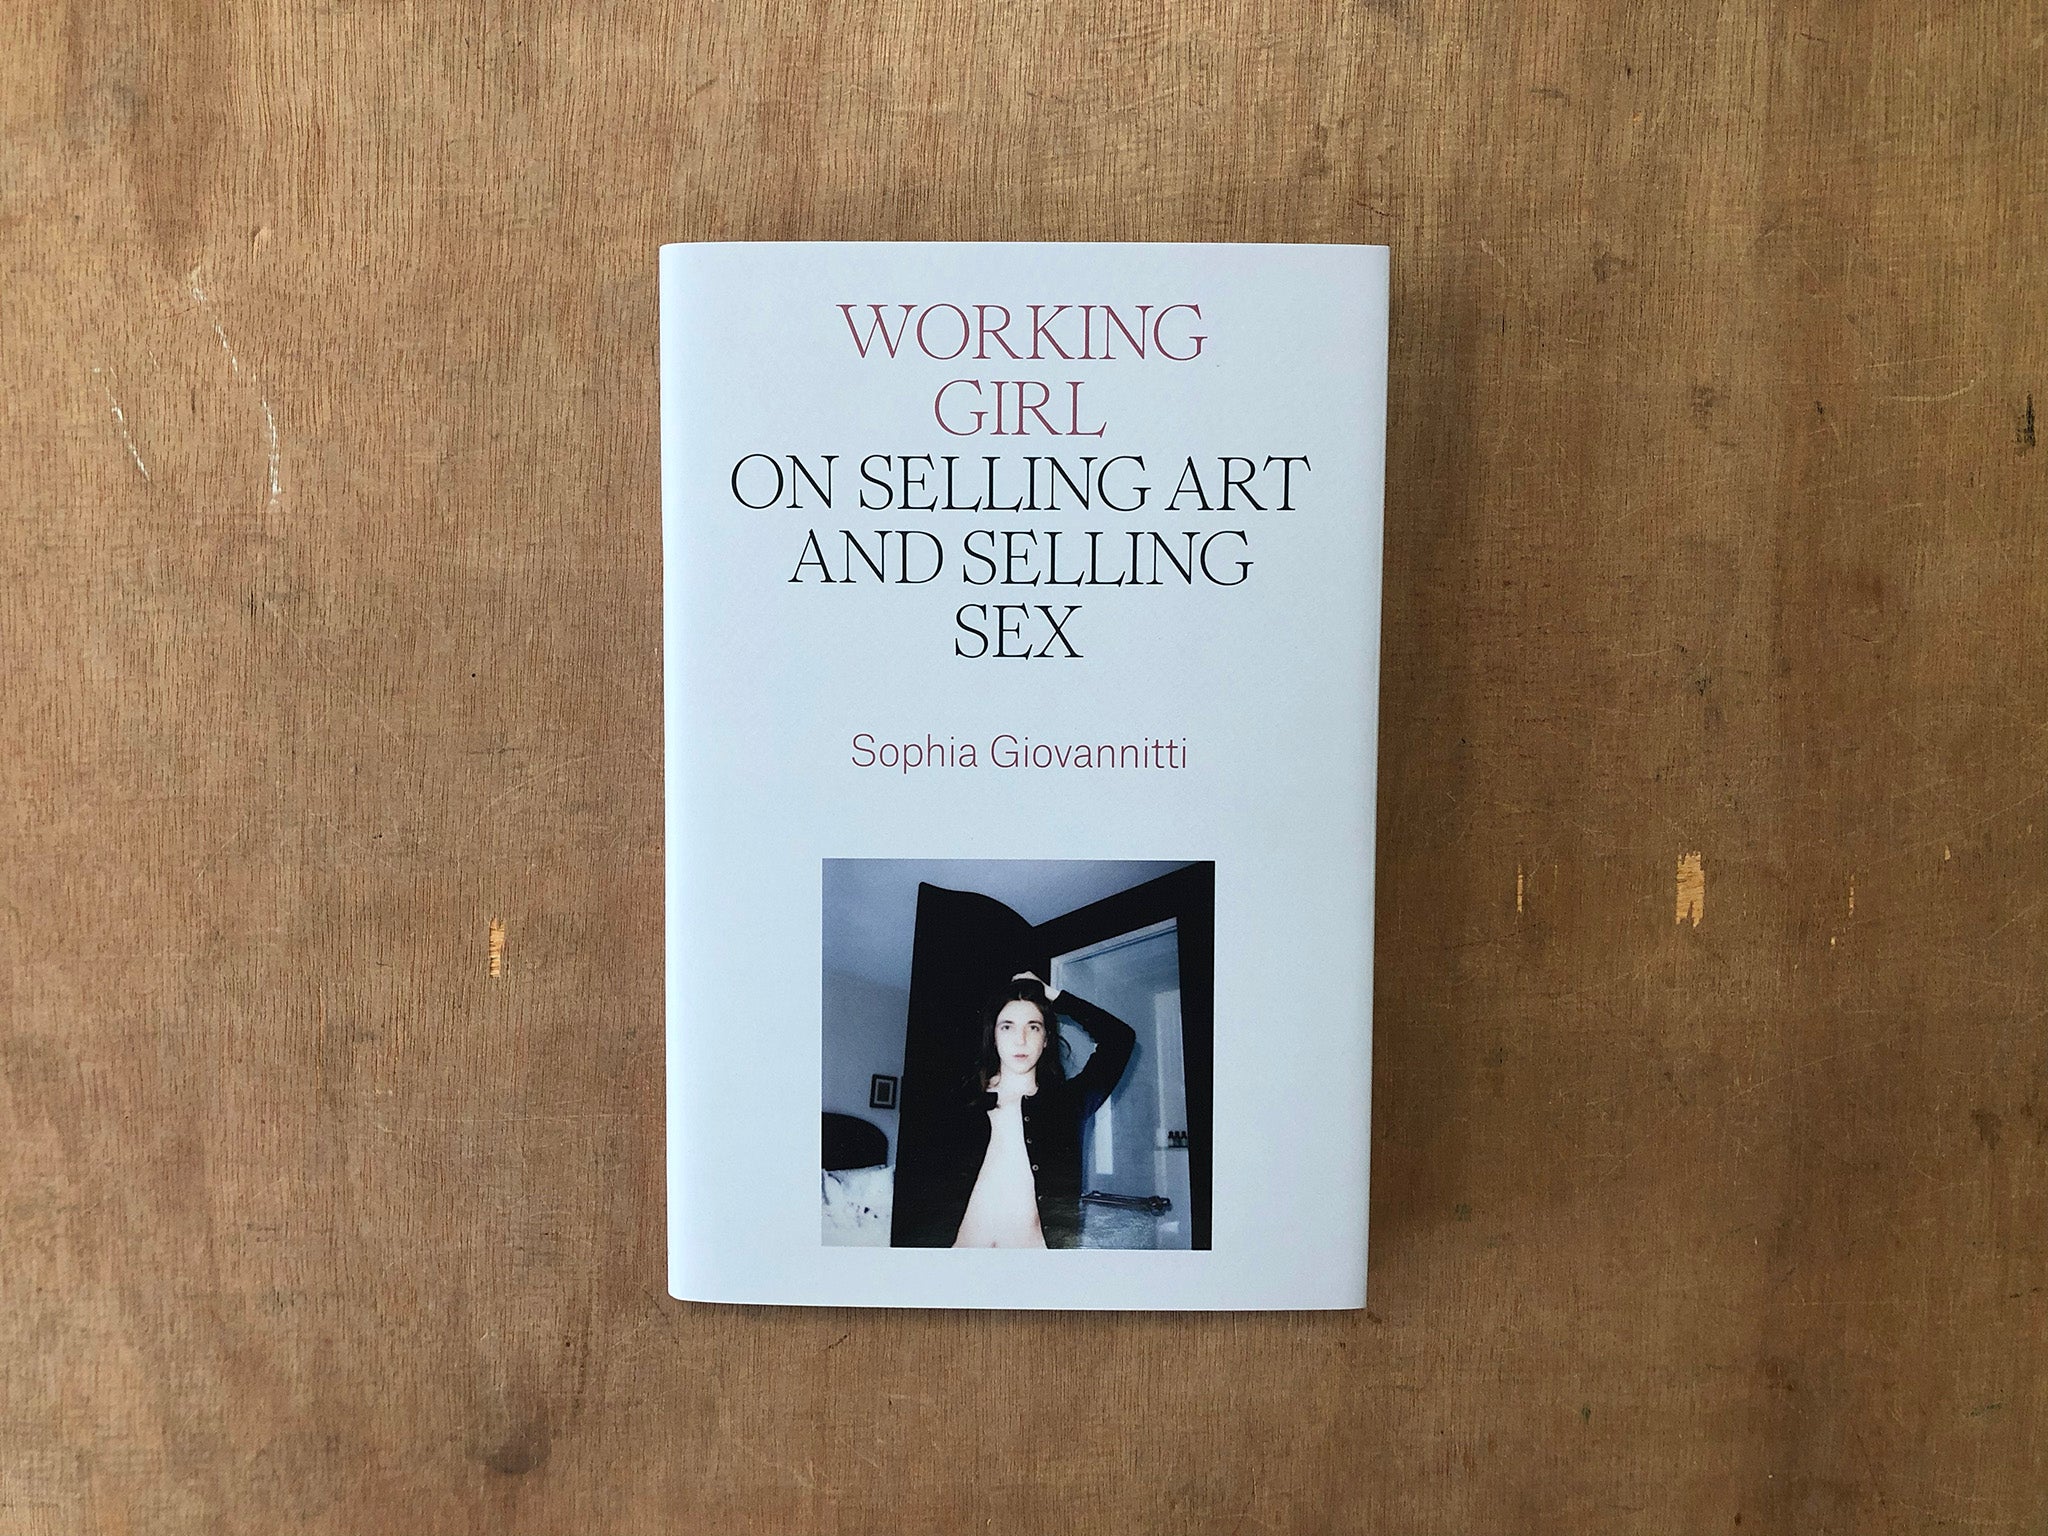 WORKING GIRL: ON SELLING ART AND SELLING SEX by Sophia Giovannitti